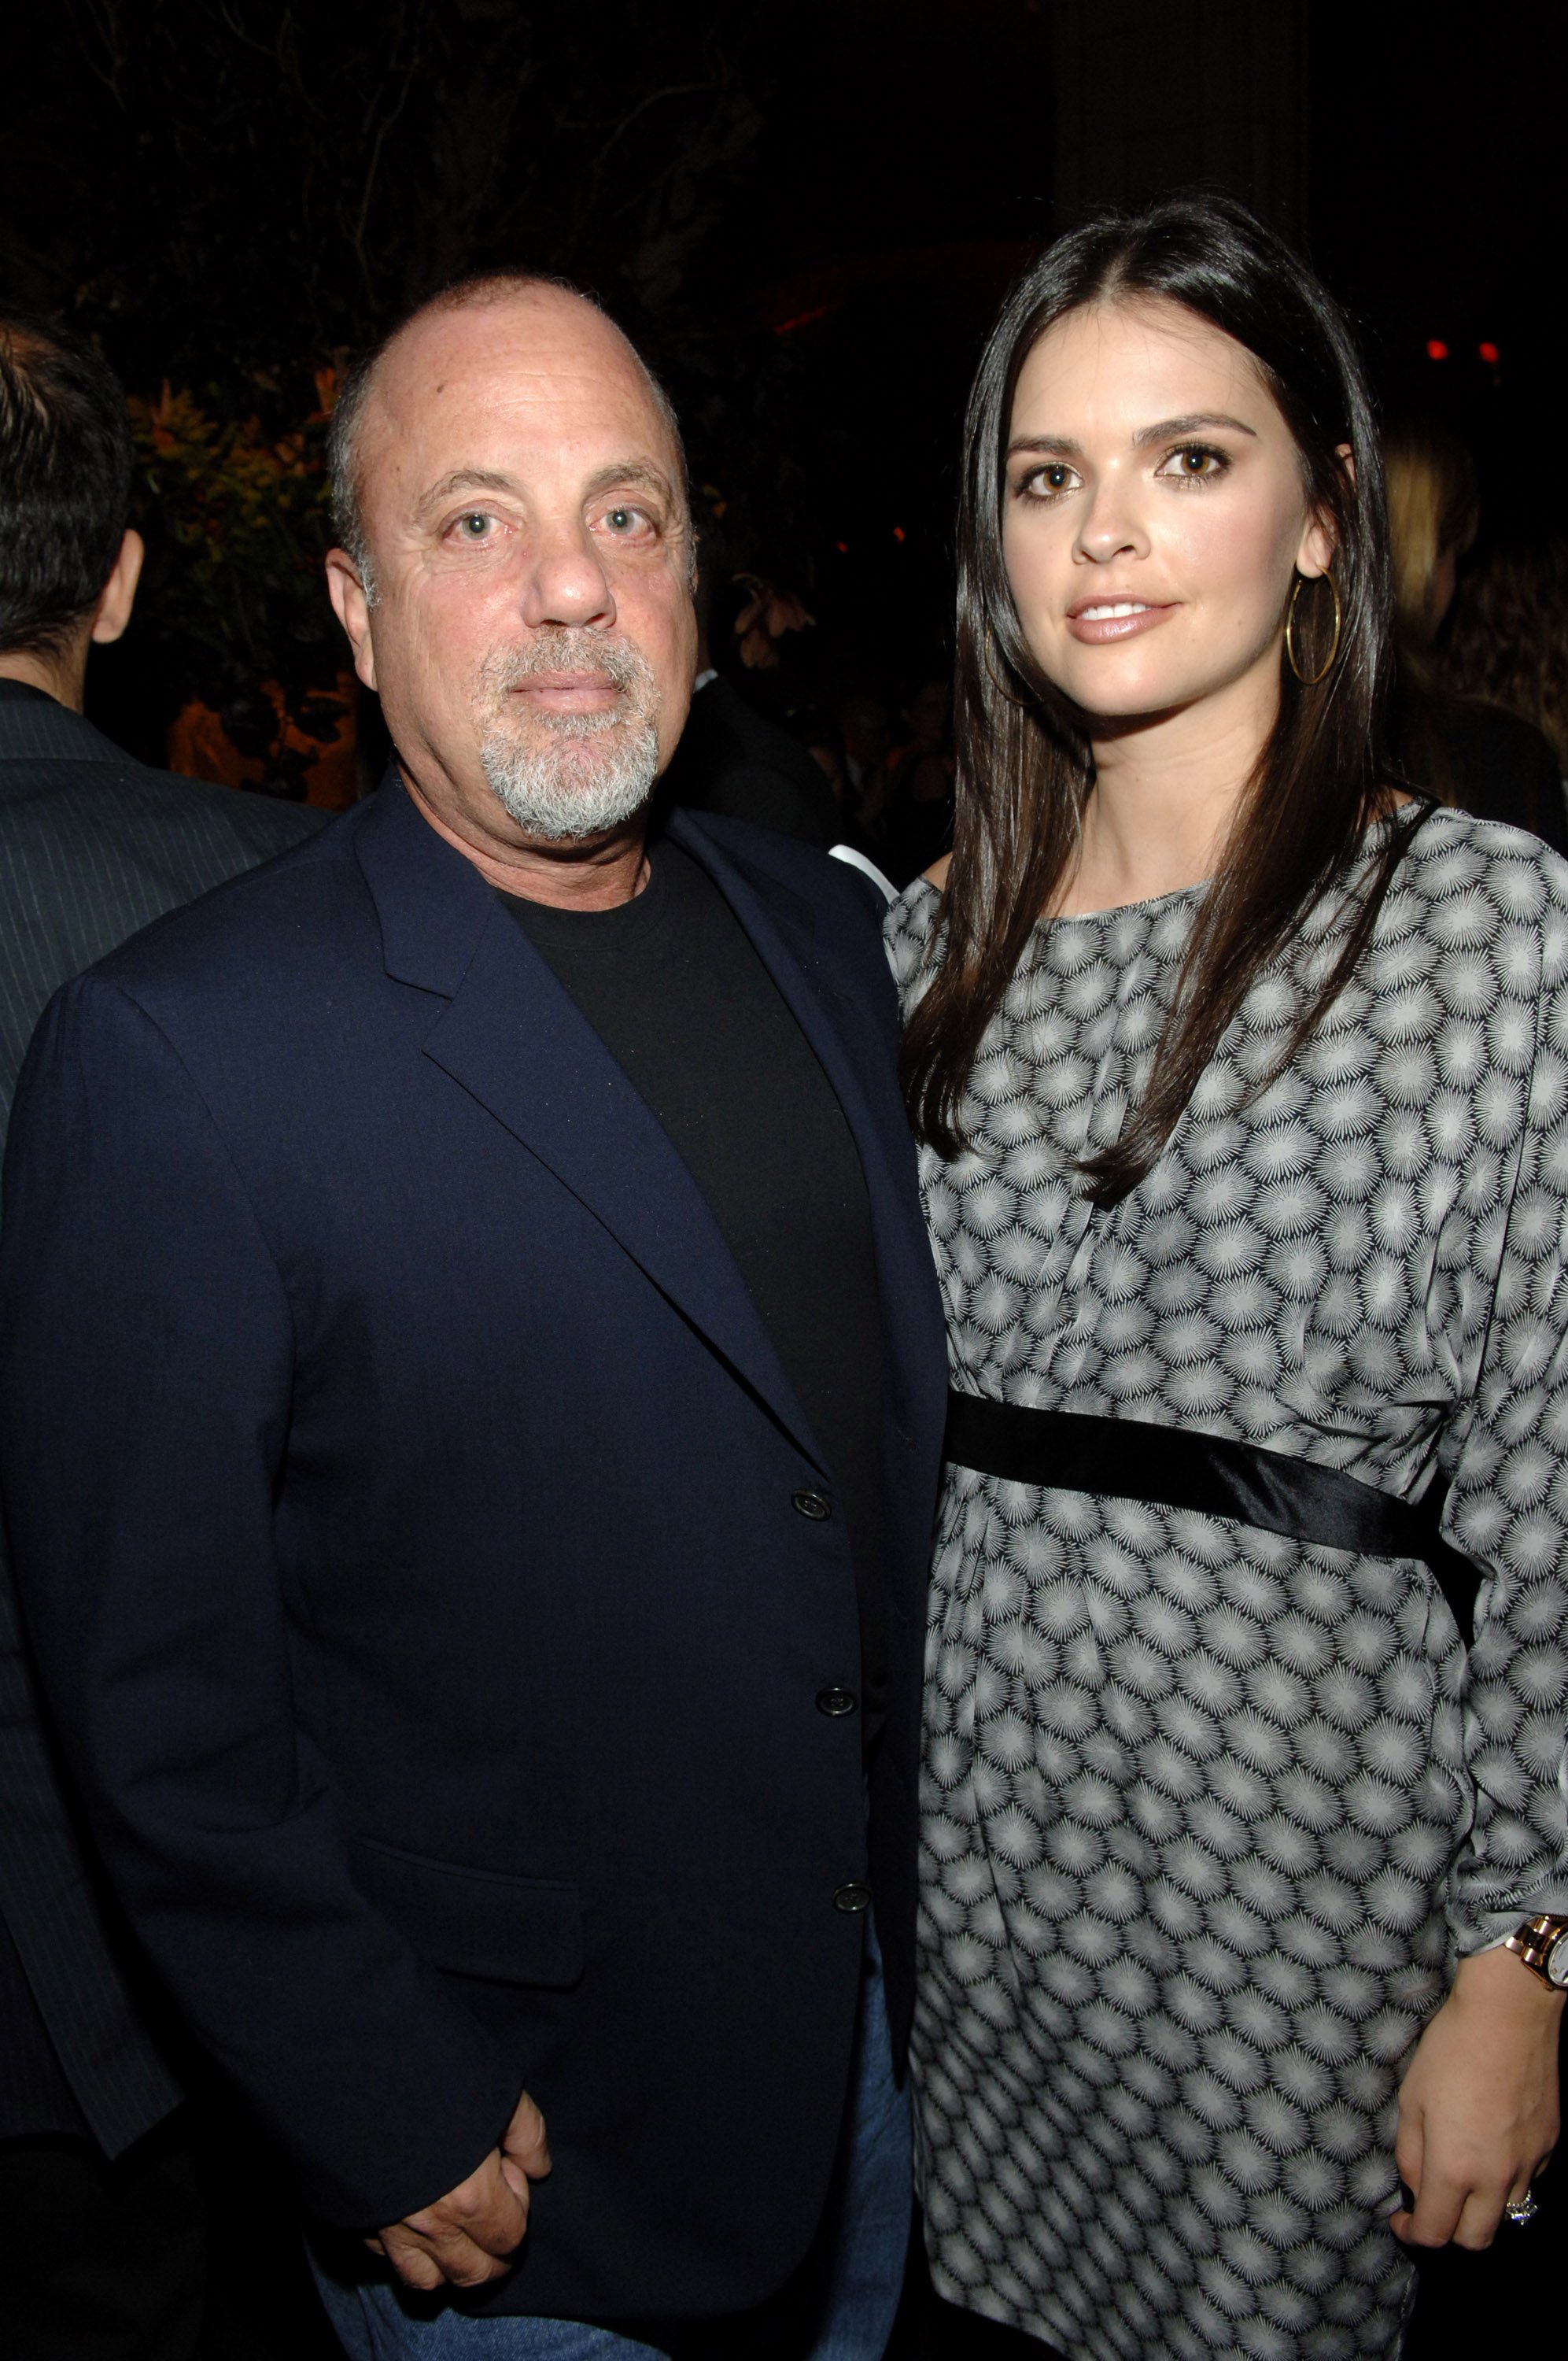 Billy Joel with wife Katie Lee Joel during "The Departed" New York premiere after party at Guastavino's restaurant in New York City, New York. / Source: Getty Images